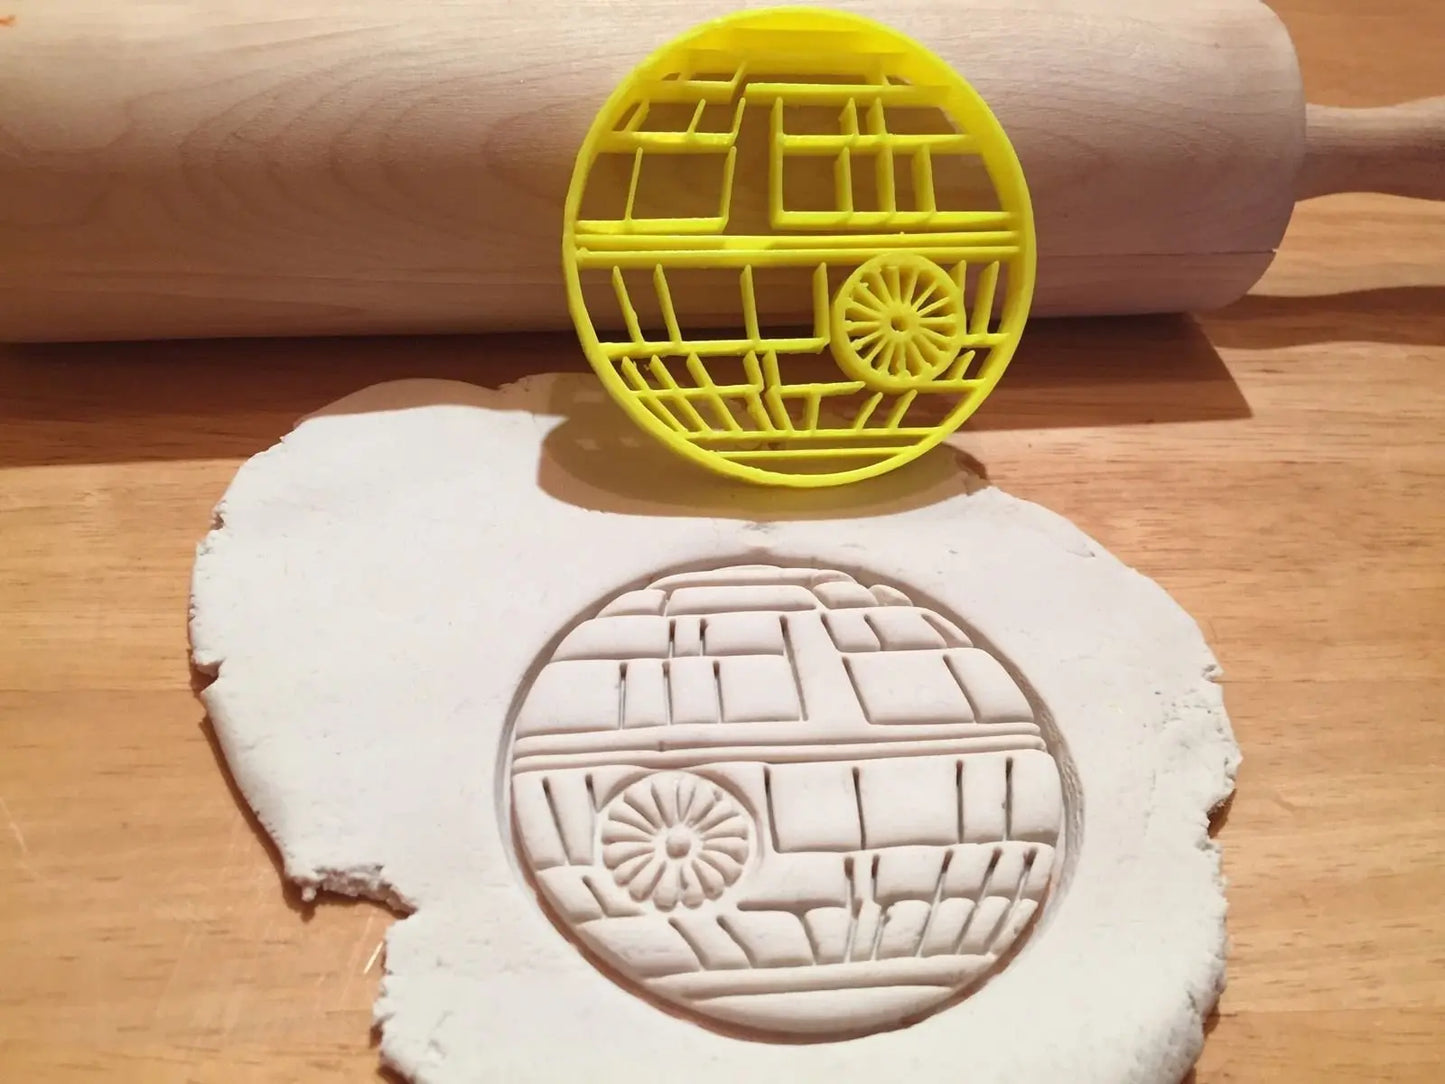 The Death Star Logo Star-INSPIRED Uk SELLER Biscuit Cookie Cutter Fondant Cake Decorating MEG cookie cutters